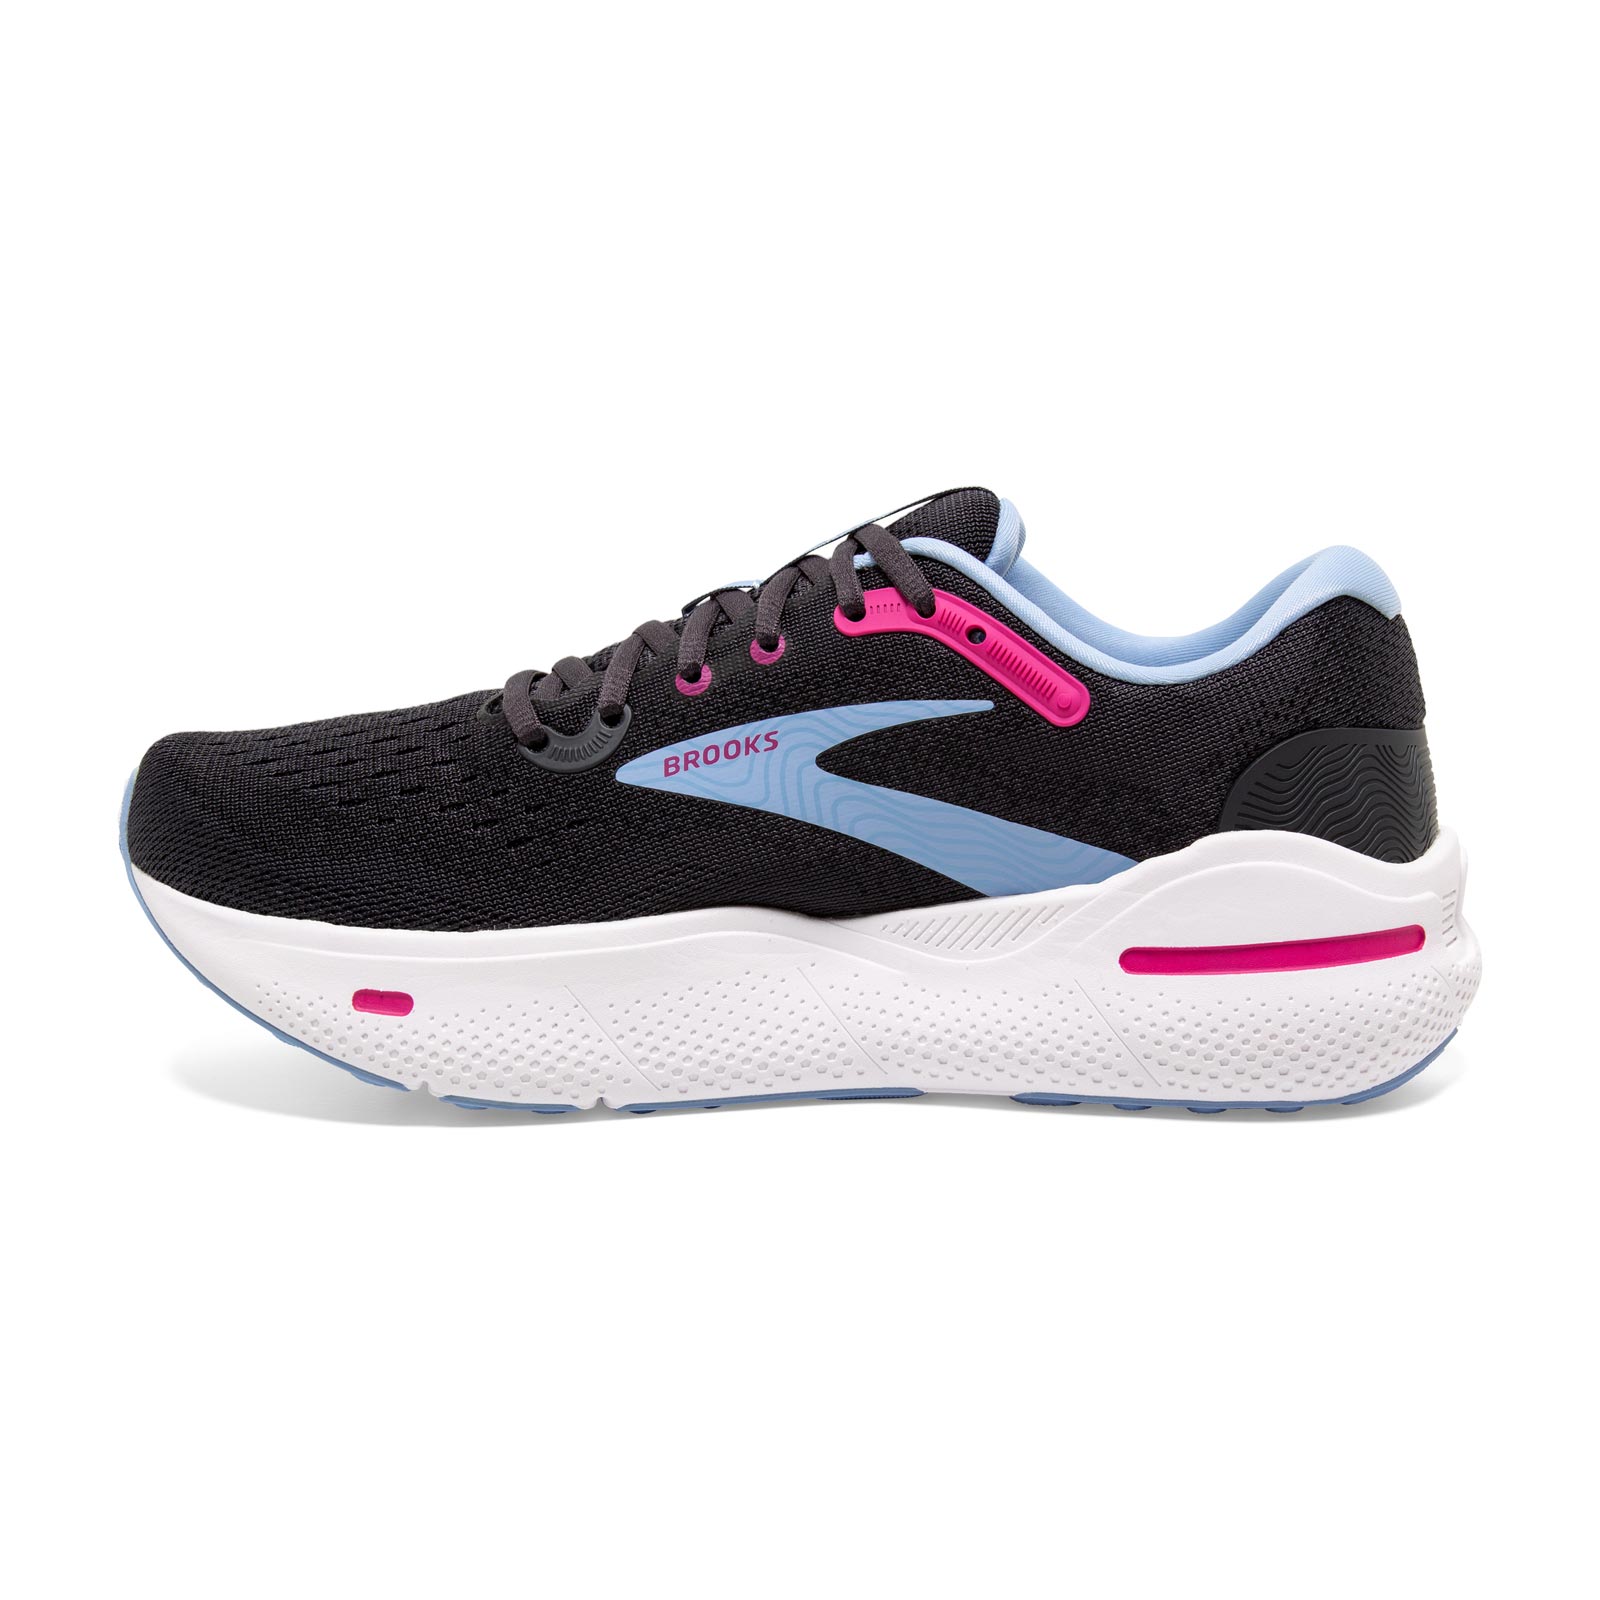 BROOKS GHOST MAX WOMENS RUNNING SHOES